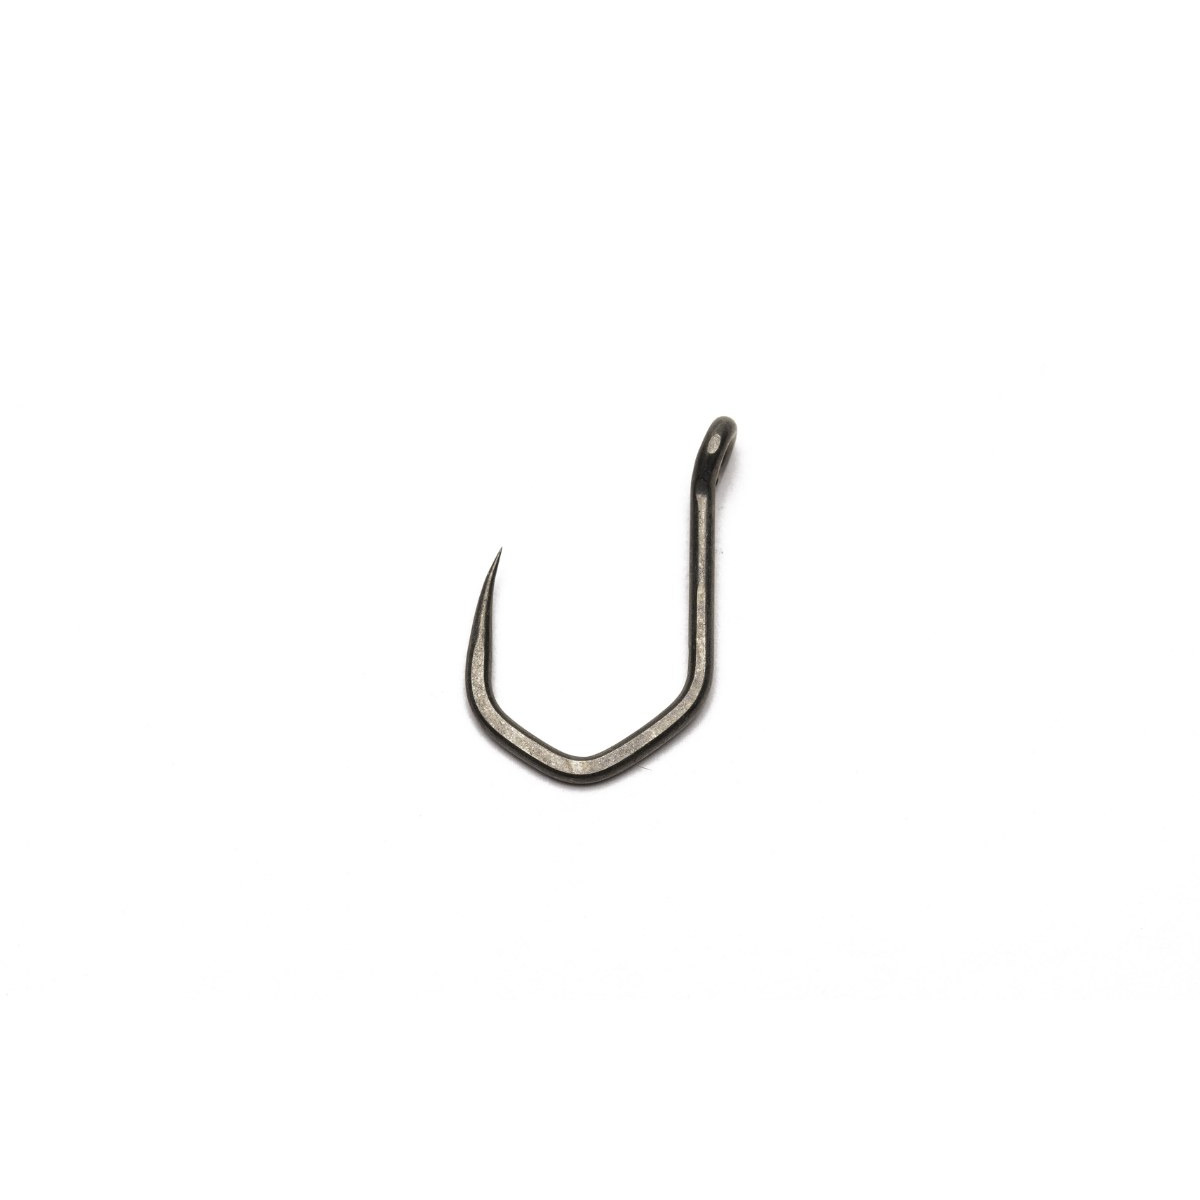 Nash Chod Claw - Size 7 Barbless